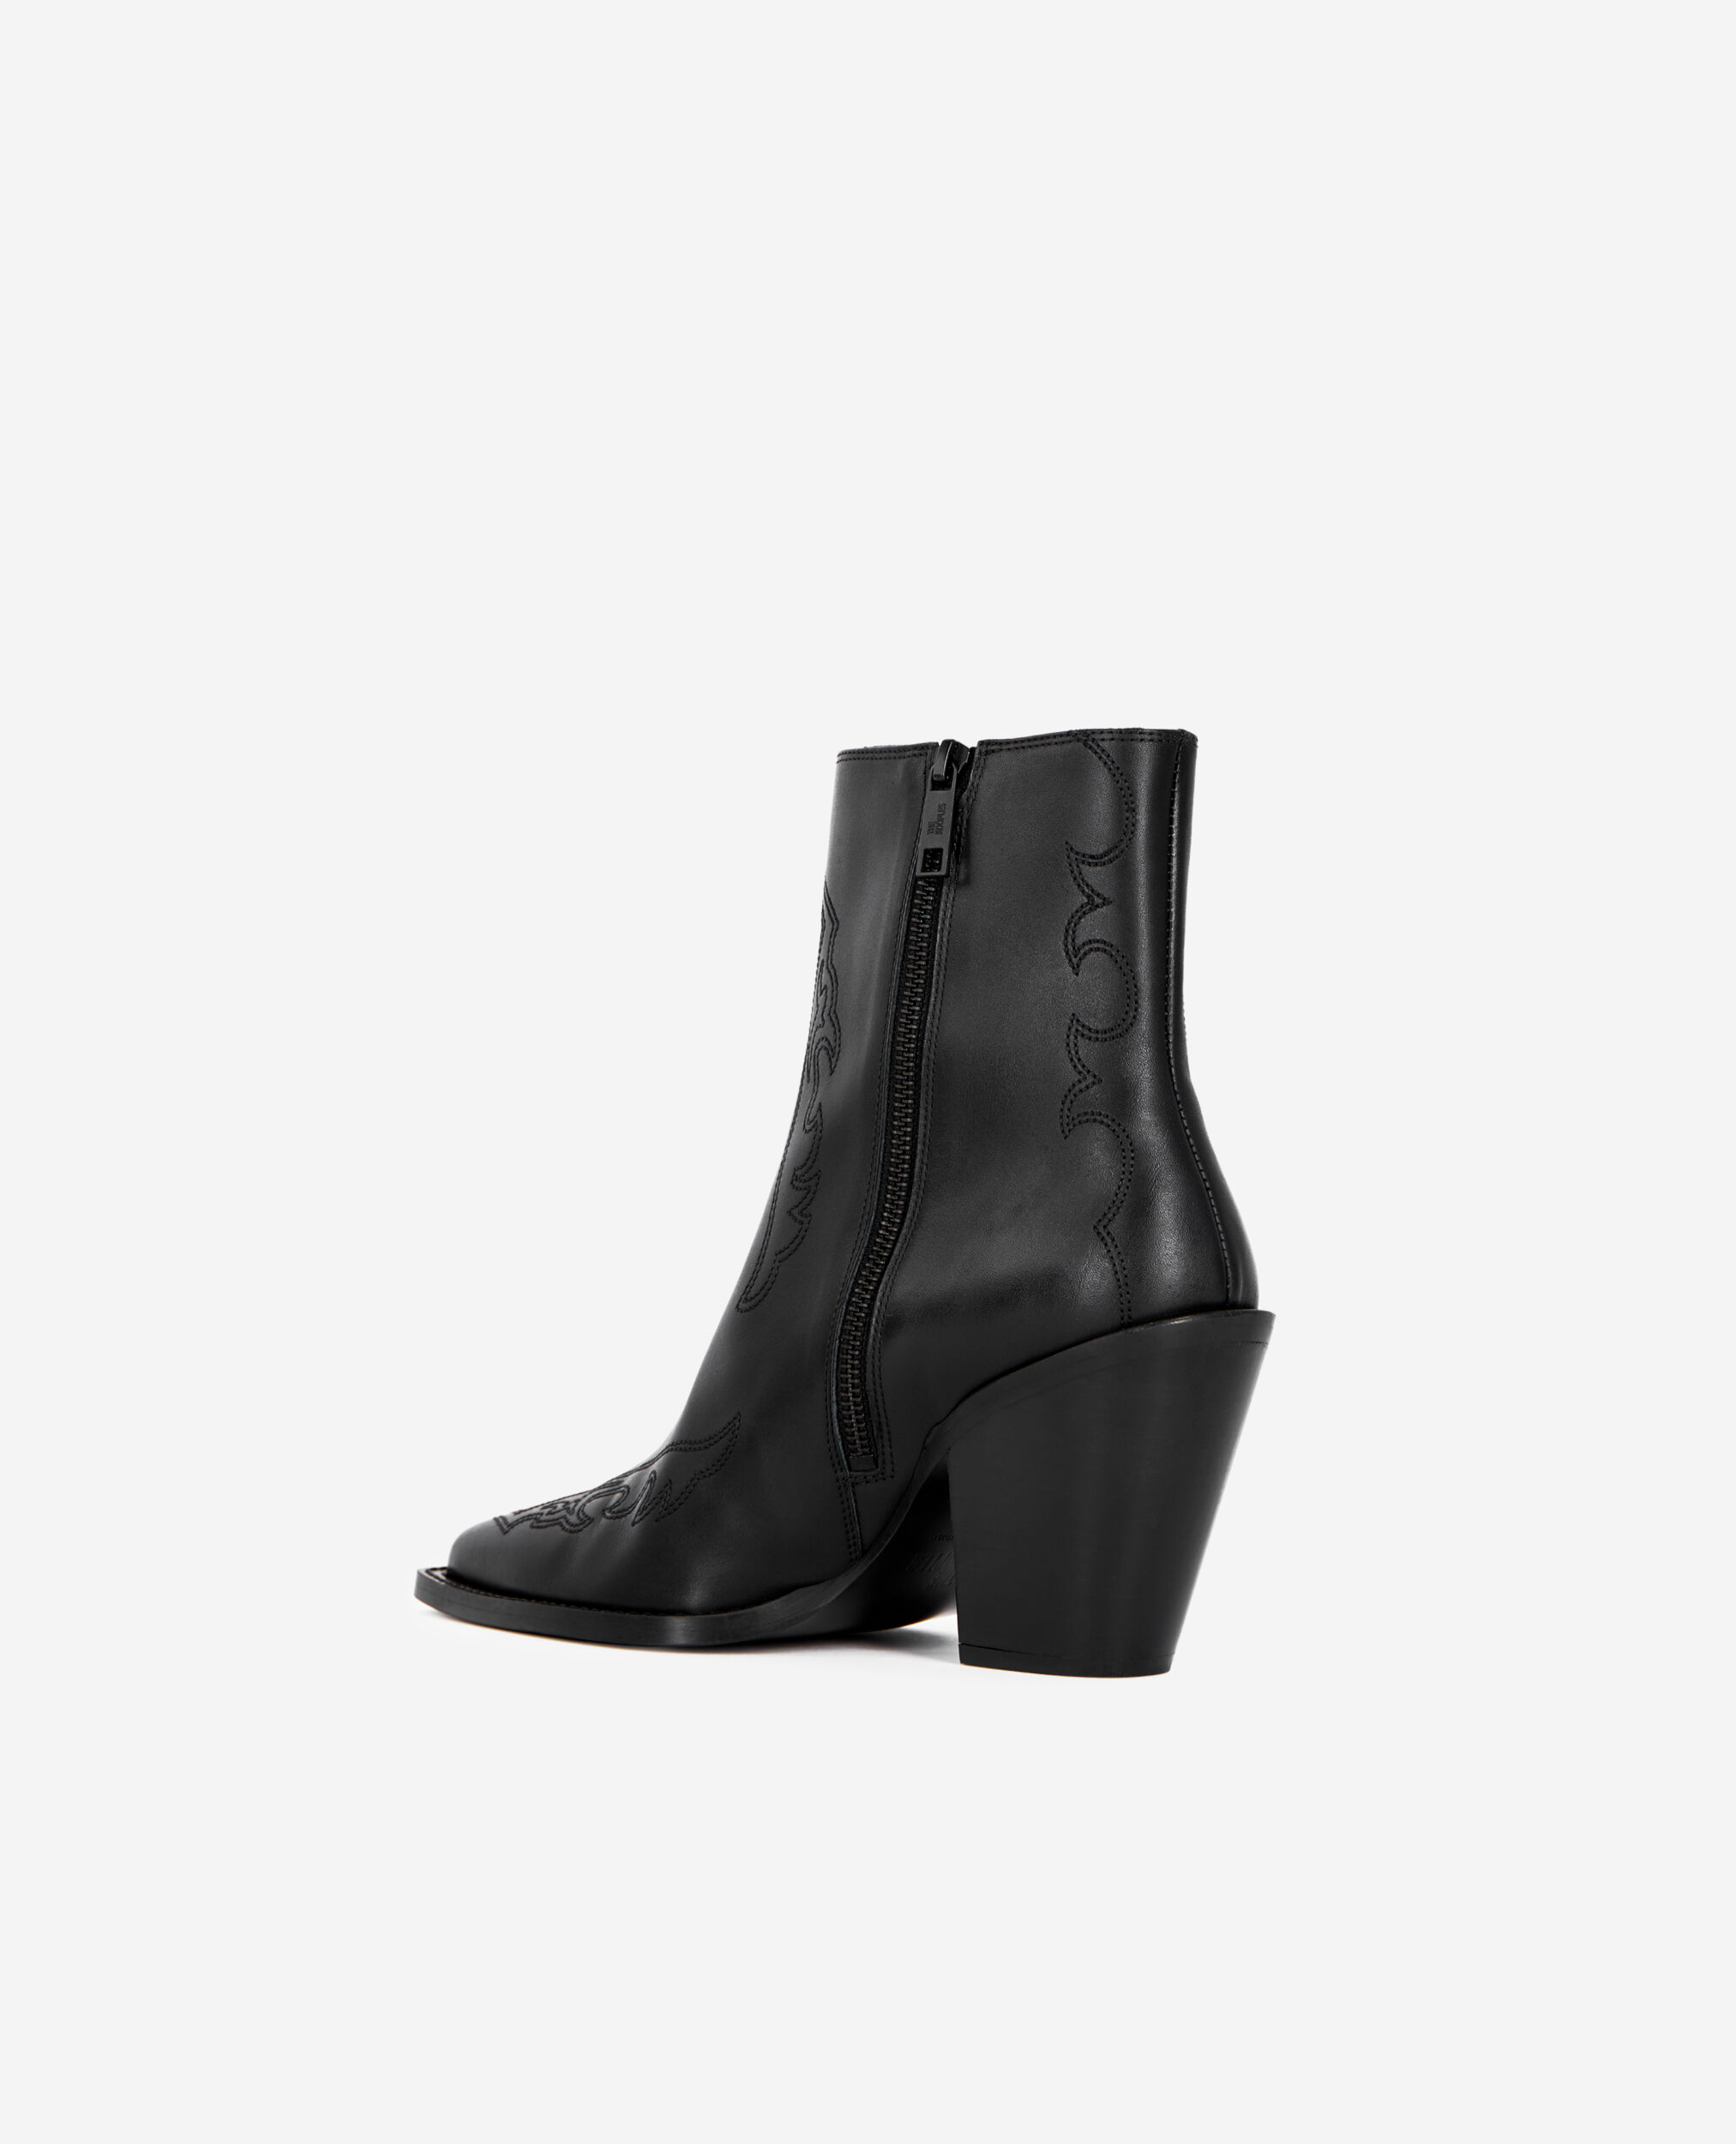 Black leather heeled ankle boots with embroidery | The Kooples - UK